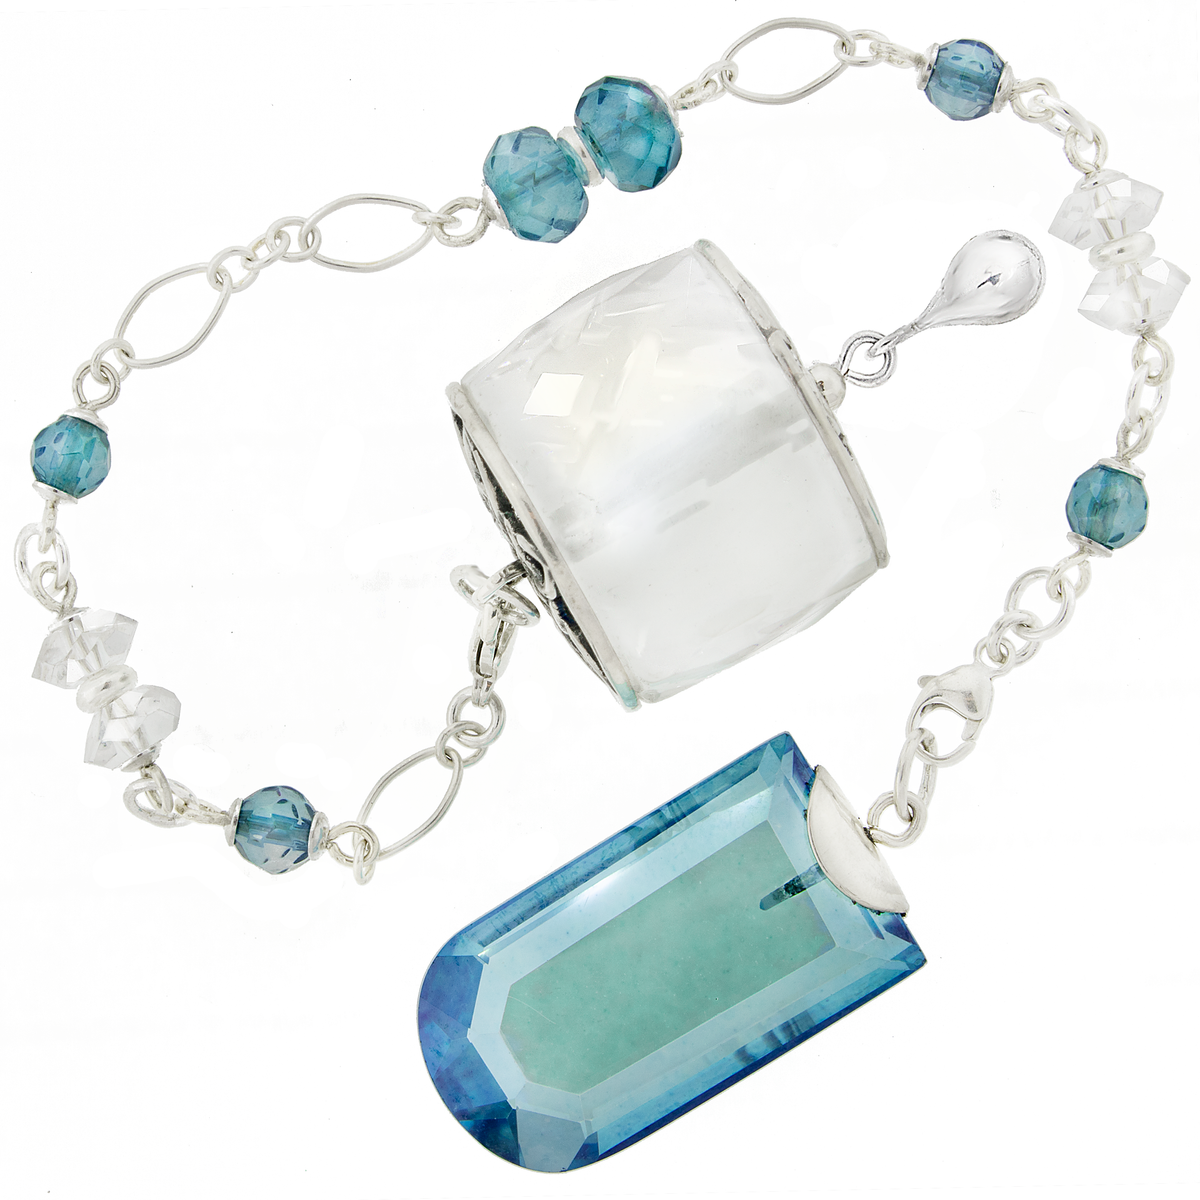 One of a Kind #385 - Clear Quartz, Aqua Aura and Sterling Silver Pendulum by Ask Your Pendulum